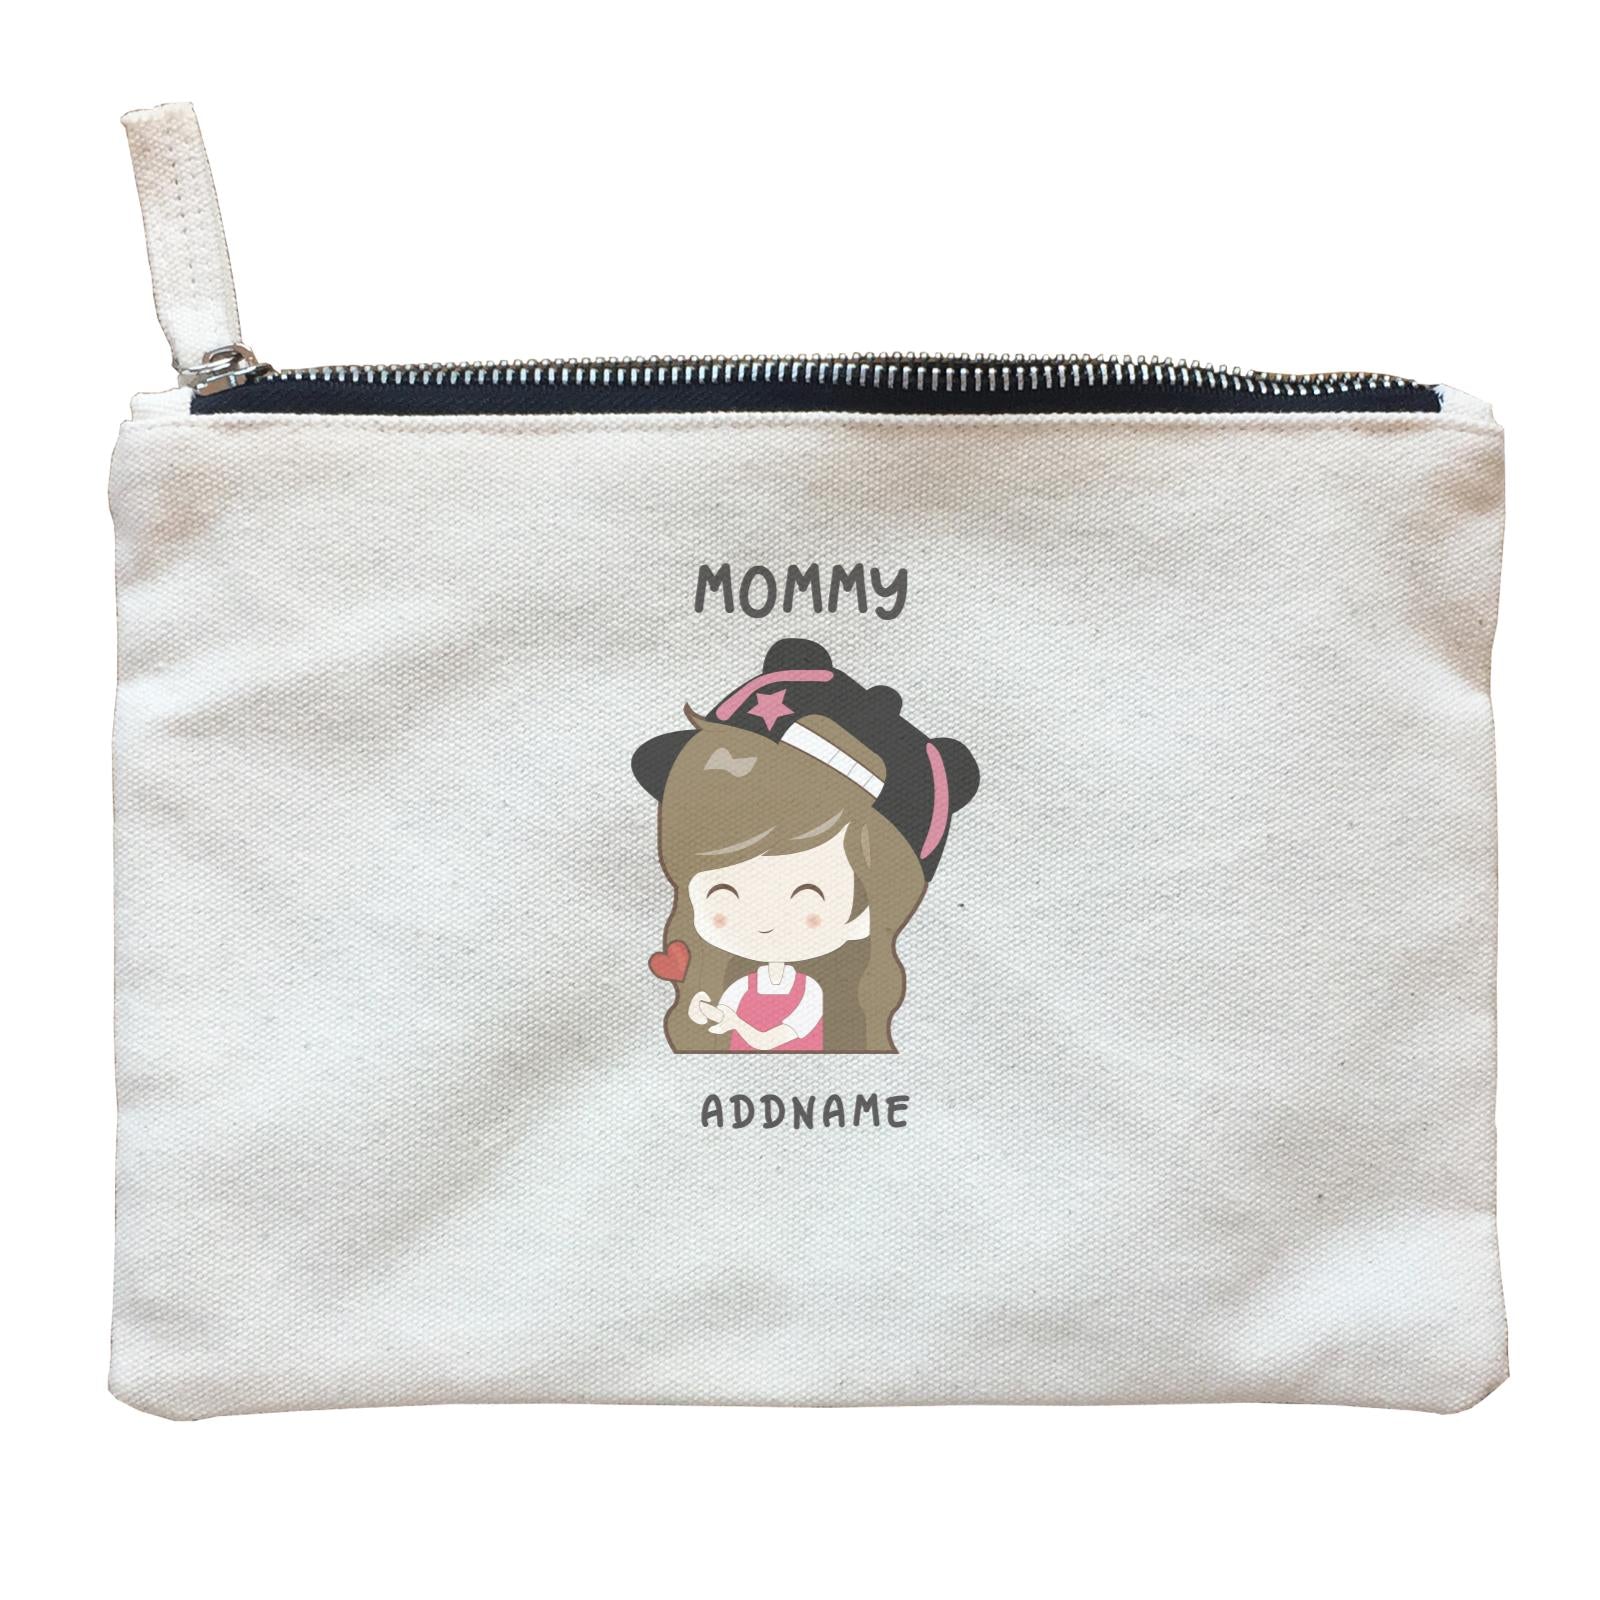 My Lovely Family Series Mommy Addname Zipper Pouch